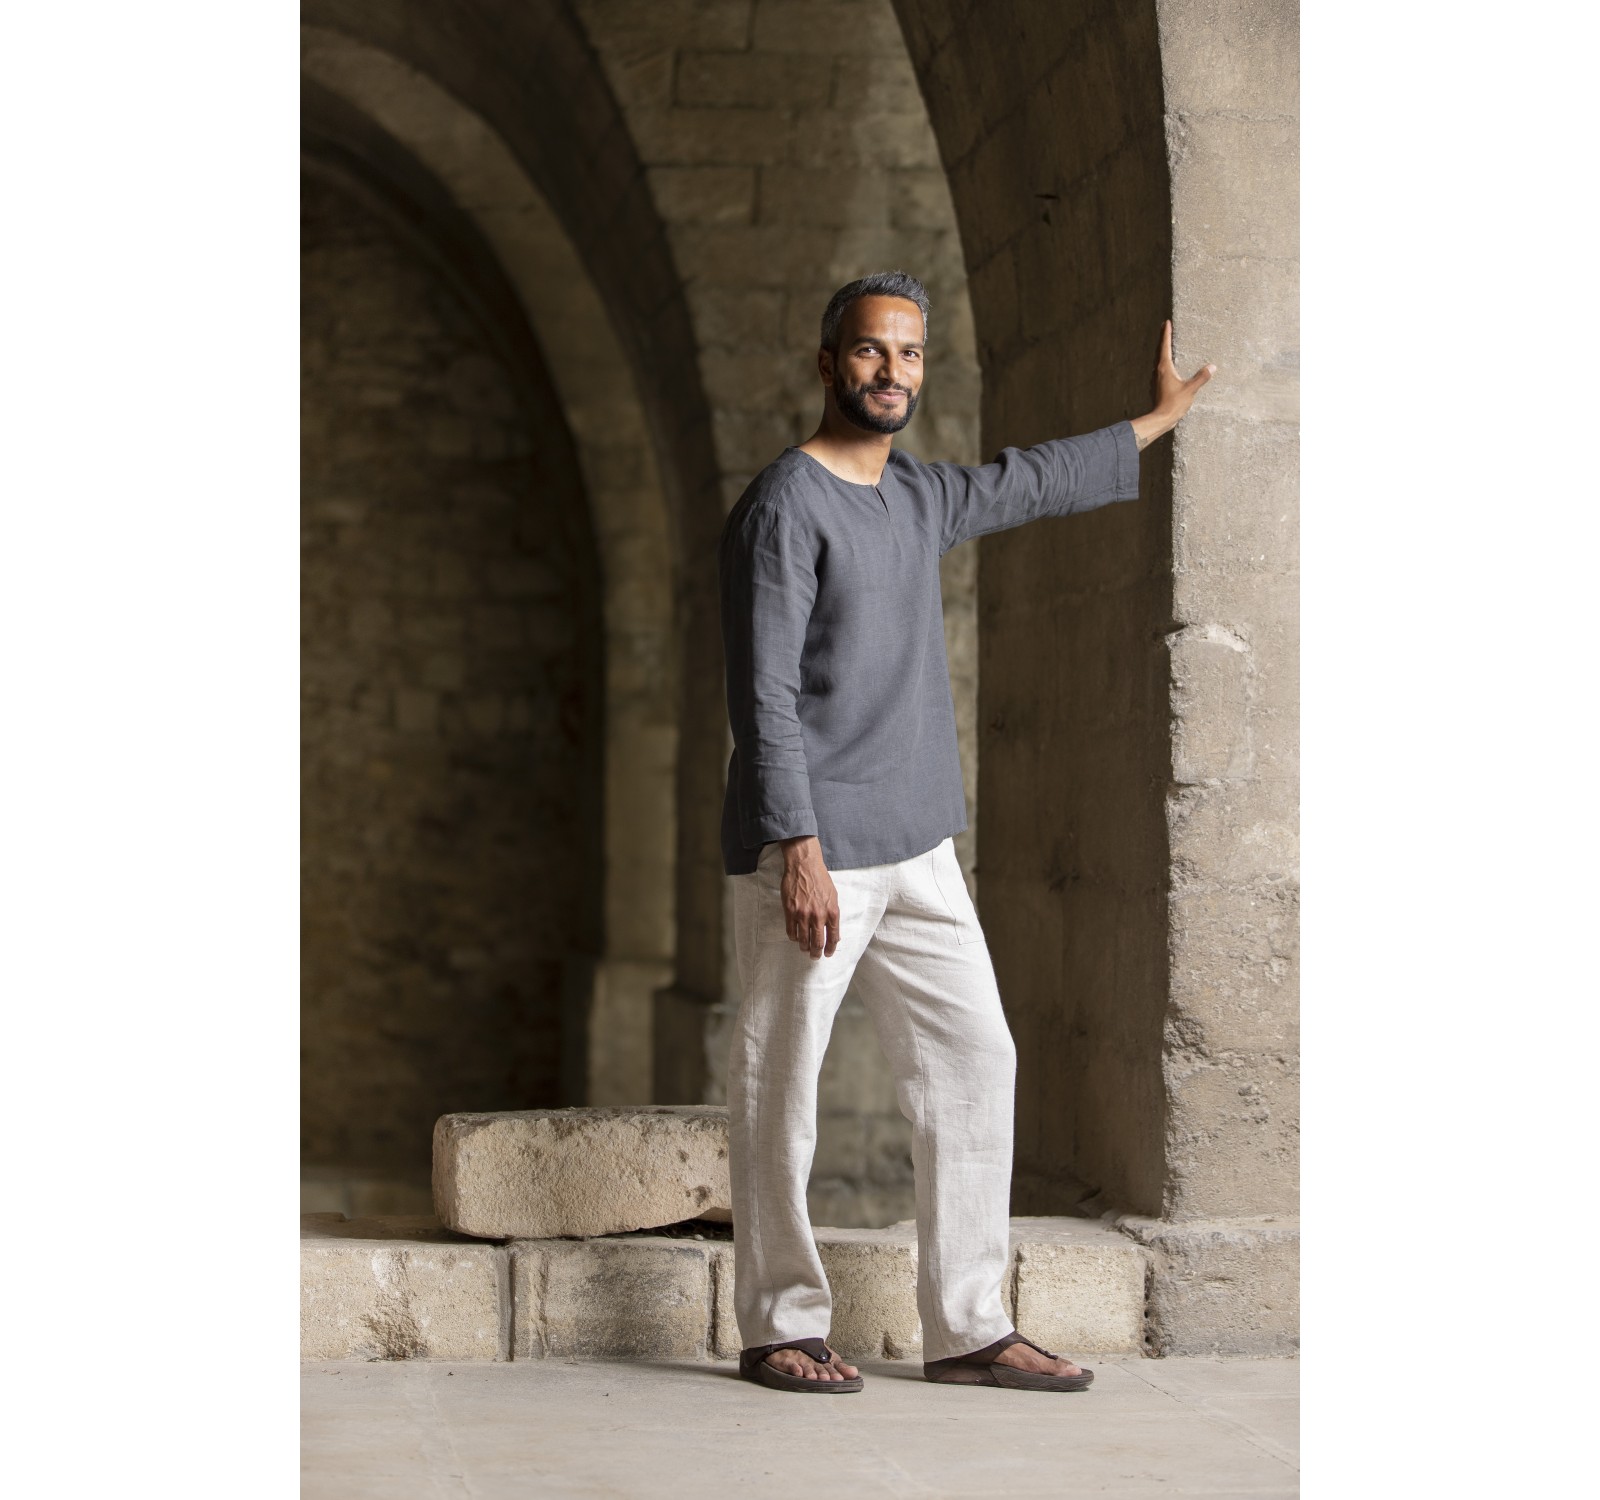 CHARCOAL GRAY LINEN TUNIC AND NATURAL COLOR LINEN PANTS